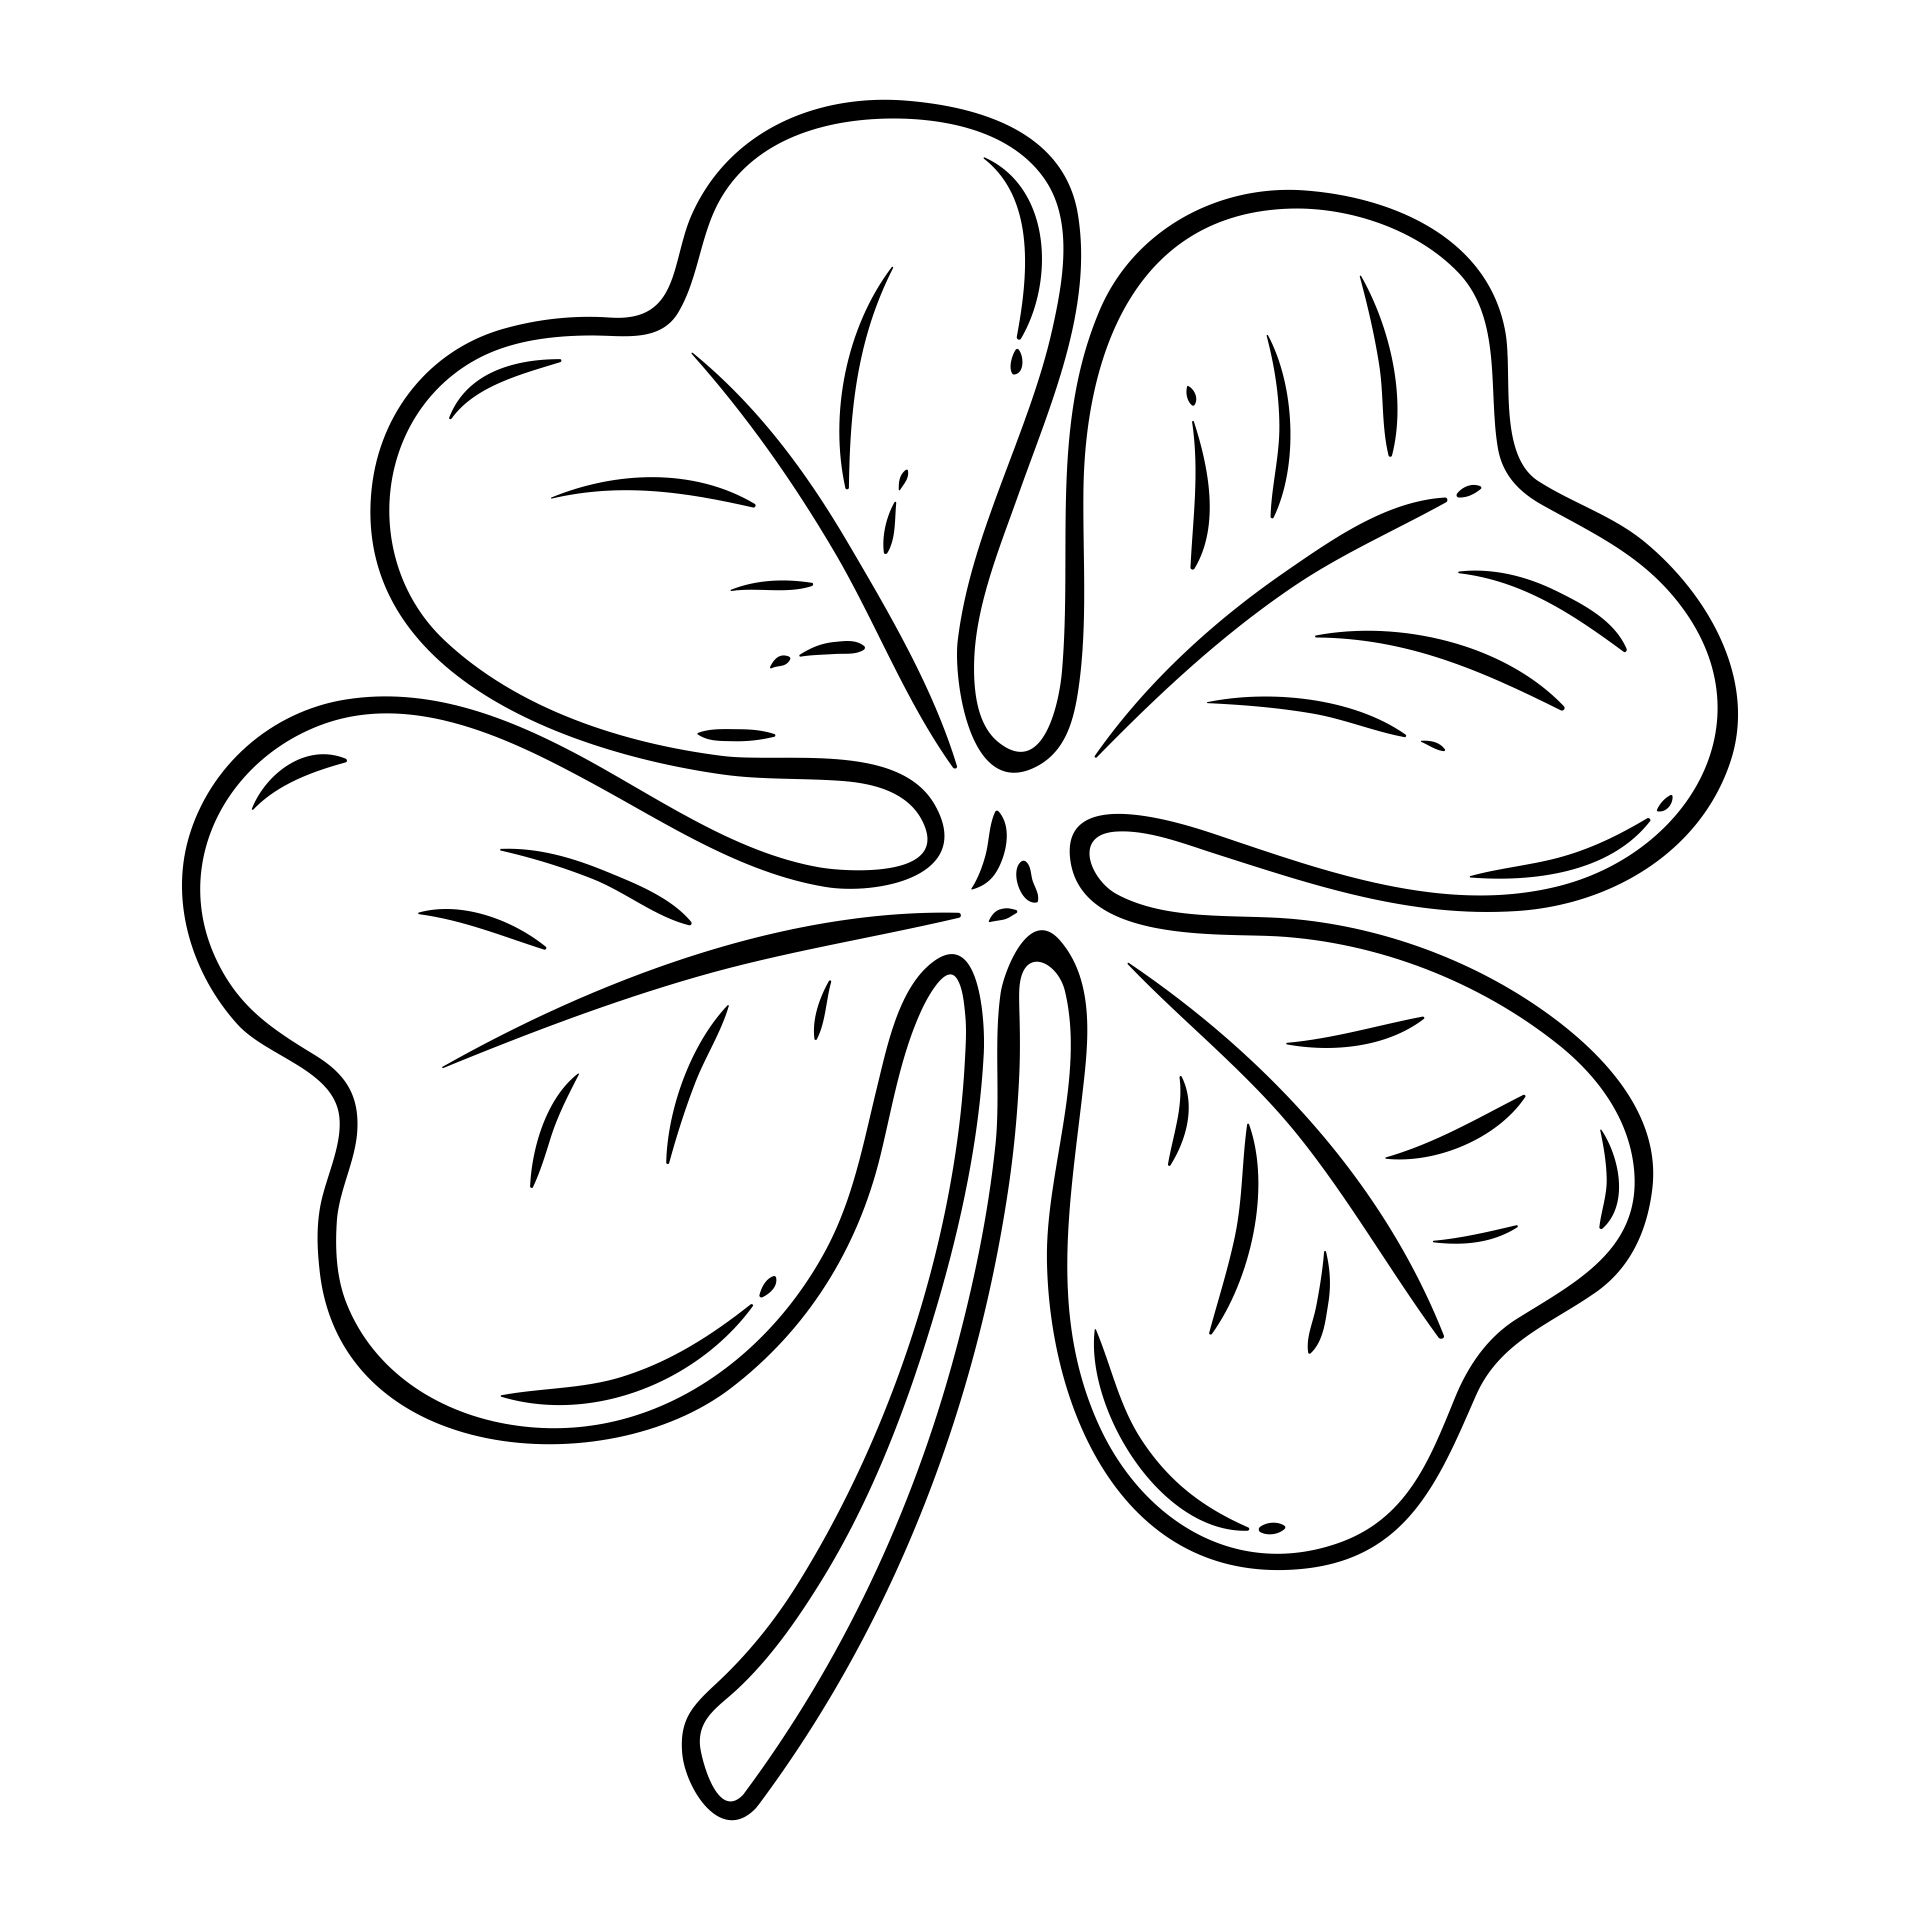 Printable Shamrock Template Coloring Page